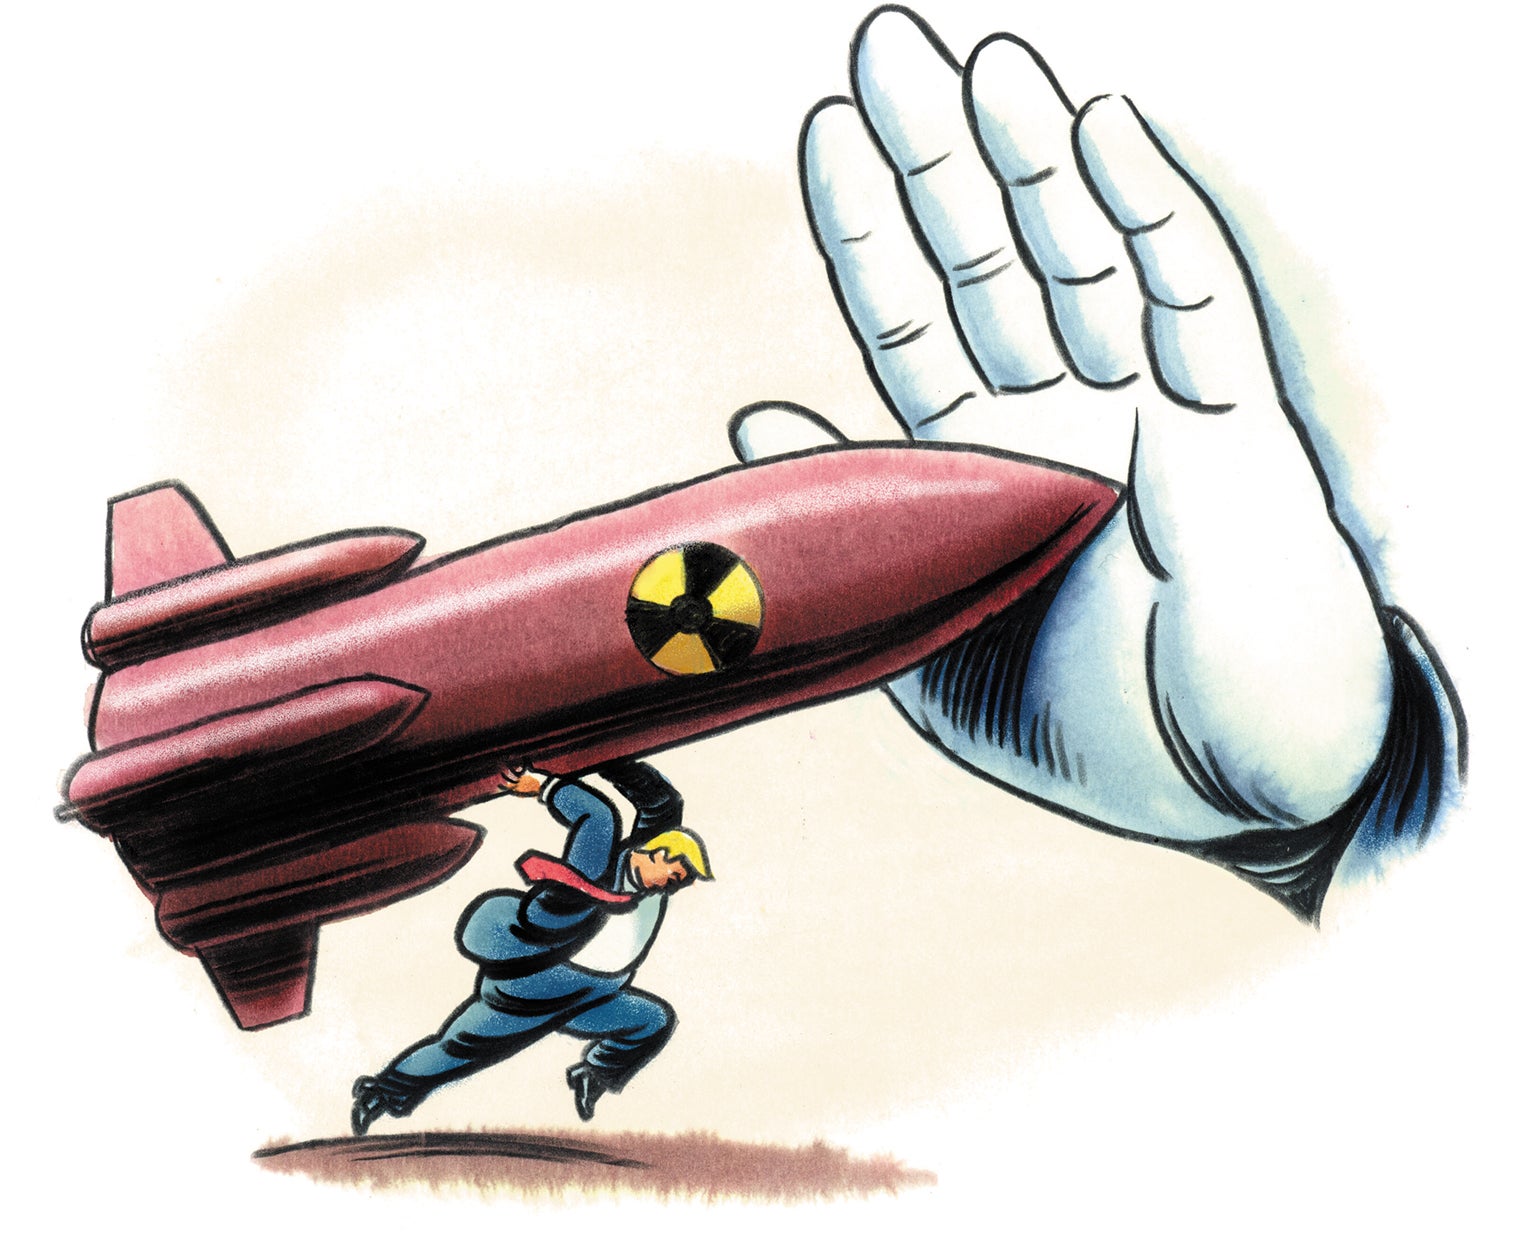 every country should have nuclear weapons